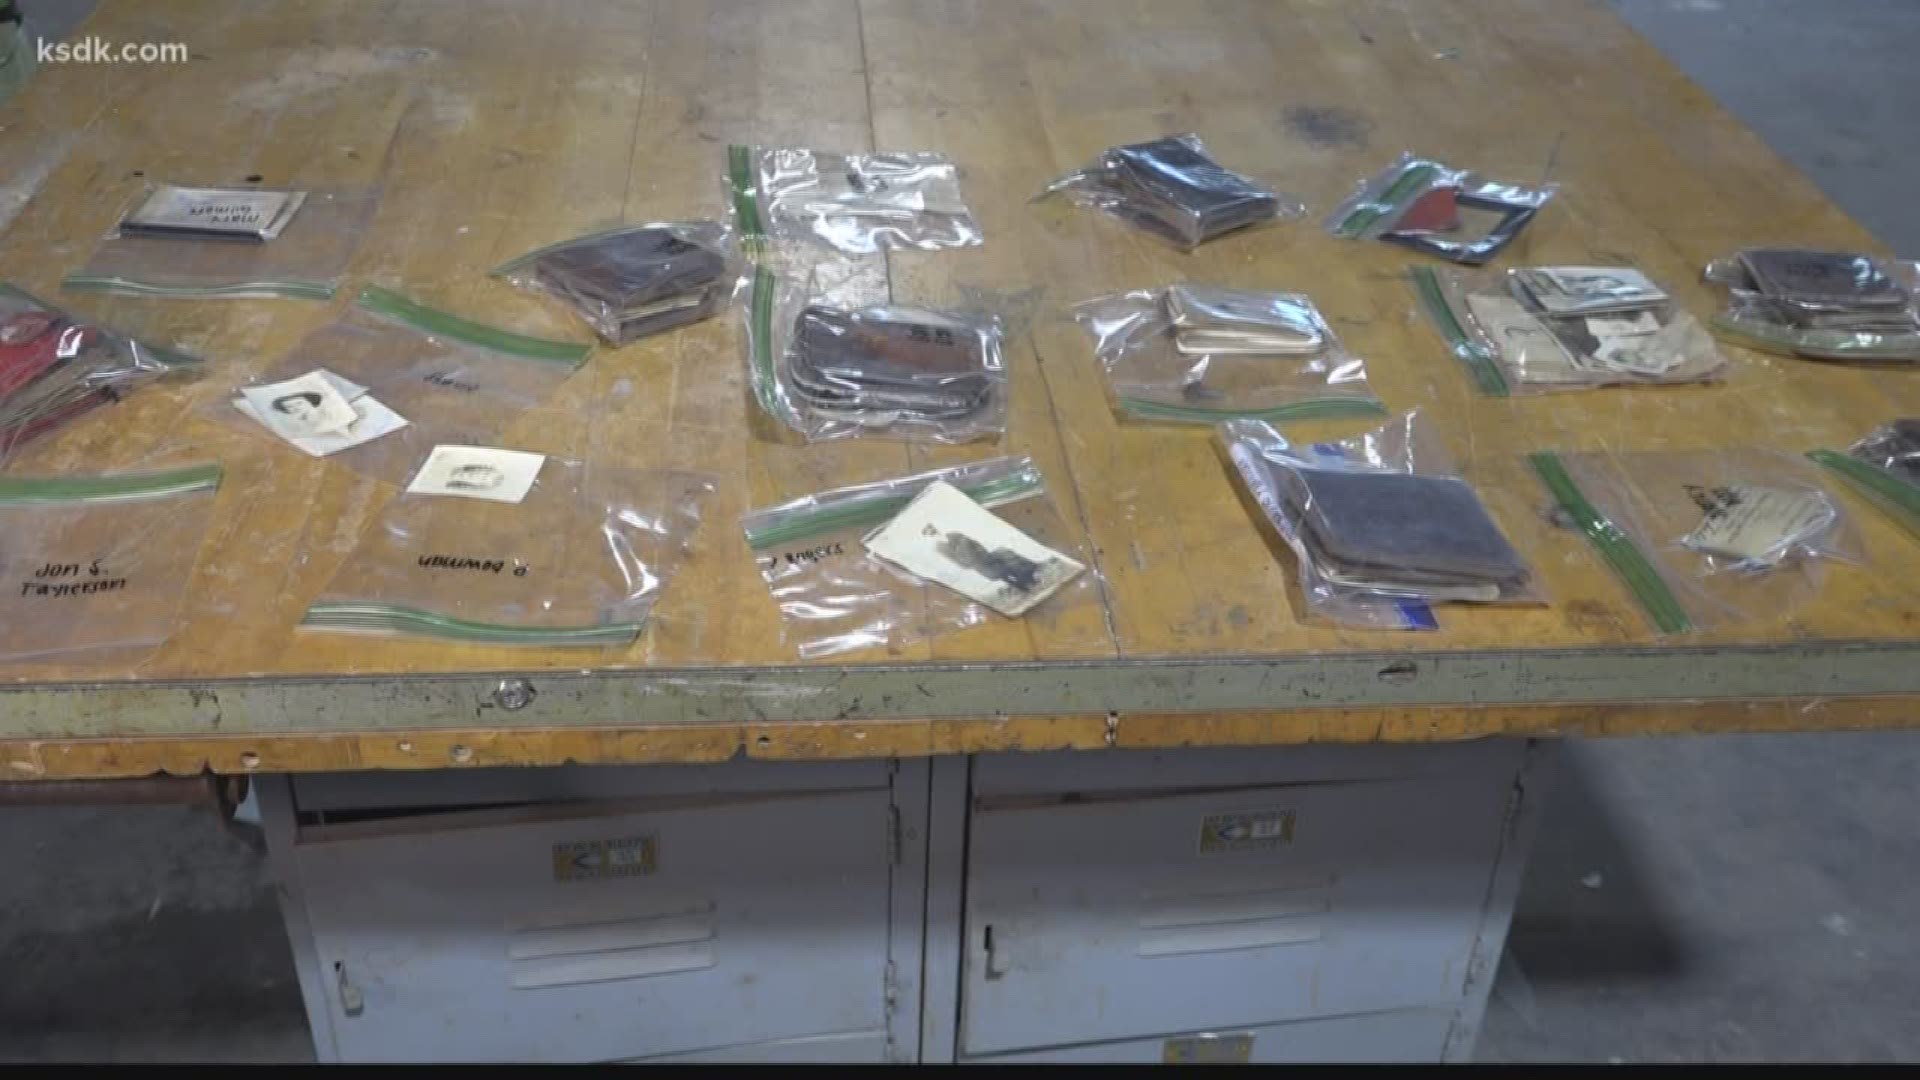 A plumber found 15 wallets stashed in a school bathroom wall. All were stolen from female students in the 1940s.